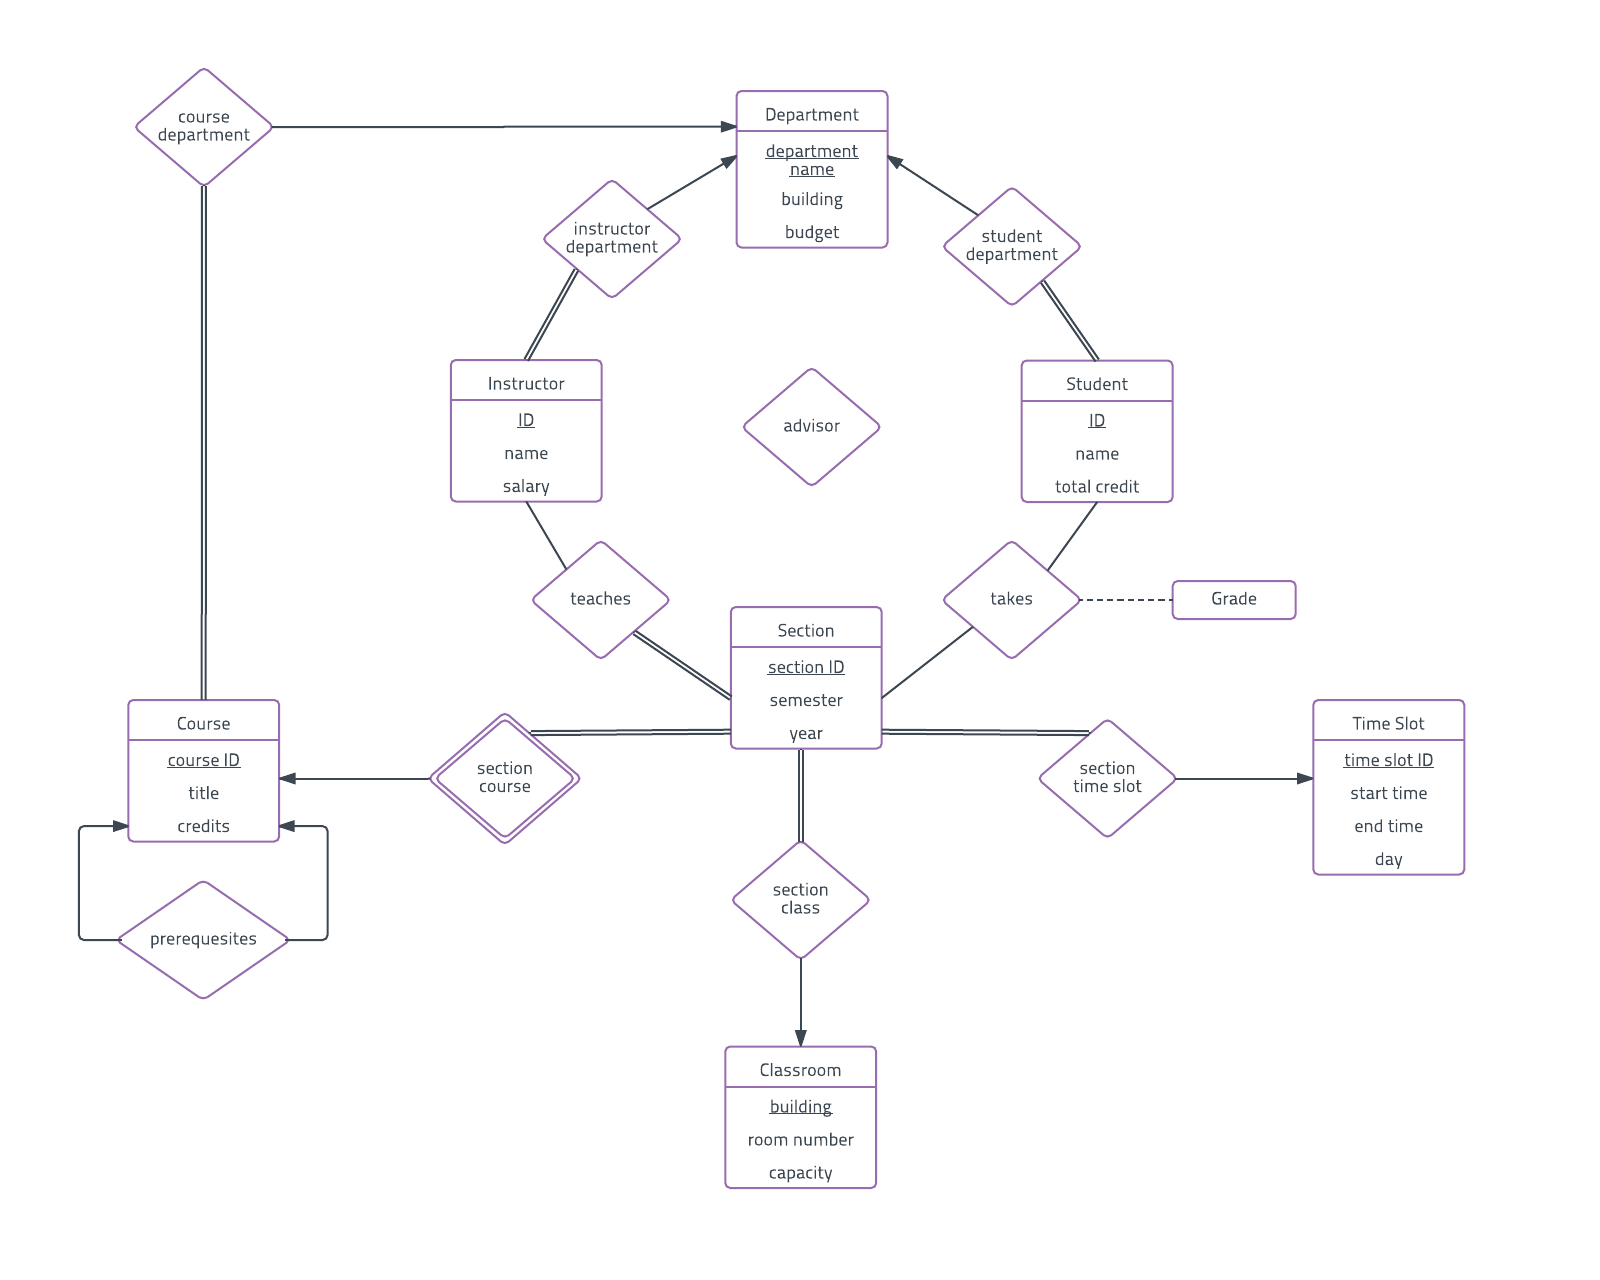 Er Diagram Examples And Templates | Lucidchart with regard to Er Diagram Examples Explanation